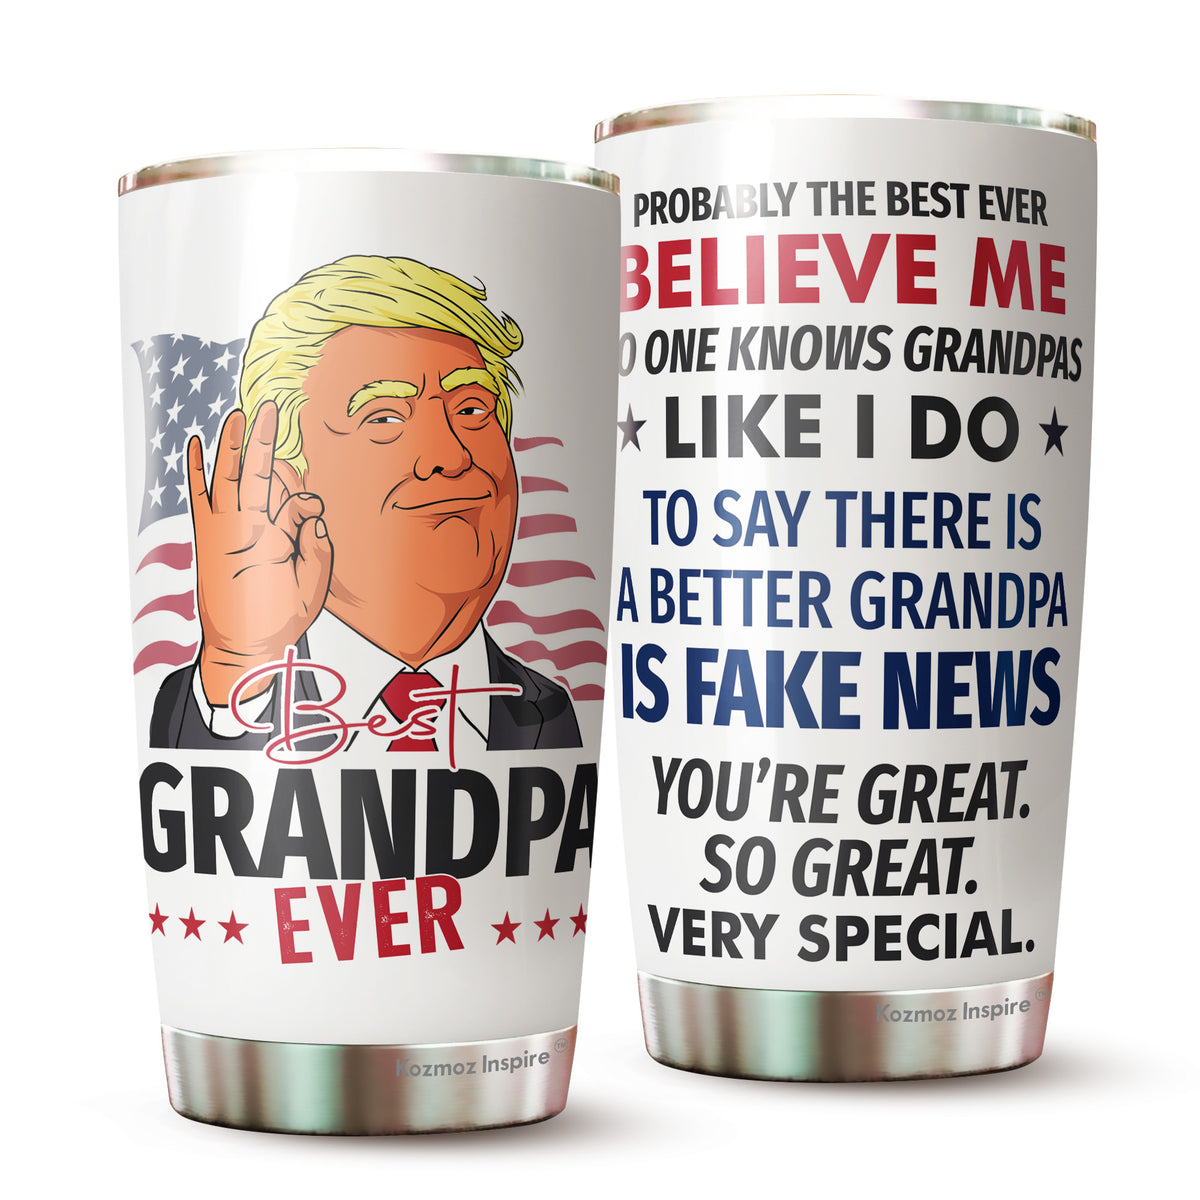 Trump Great Dad – Engraved Tumbler, Trump Tumbler For Dad, Fathers